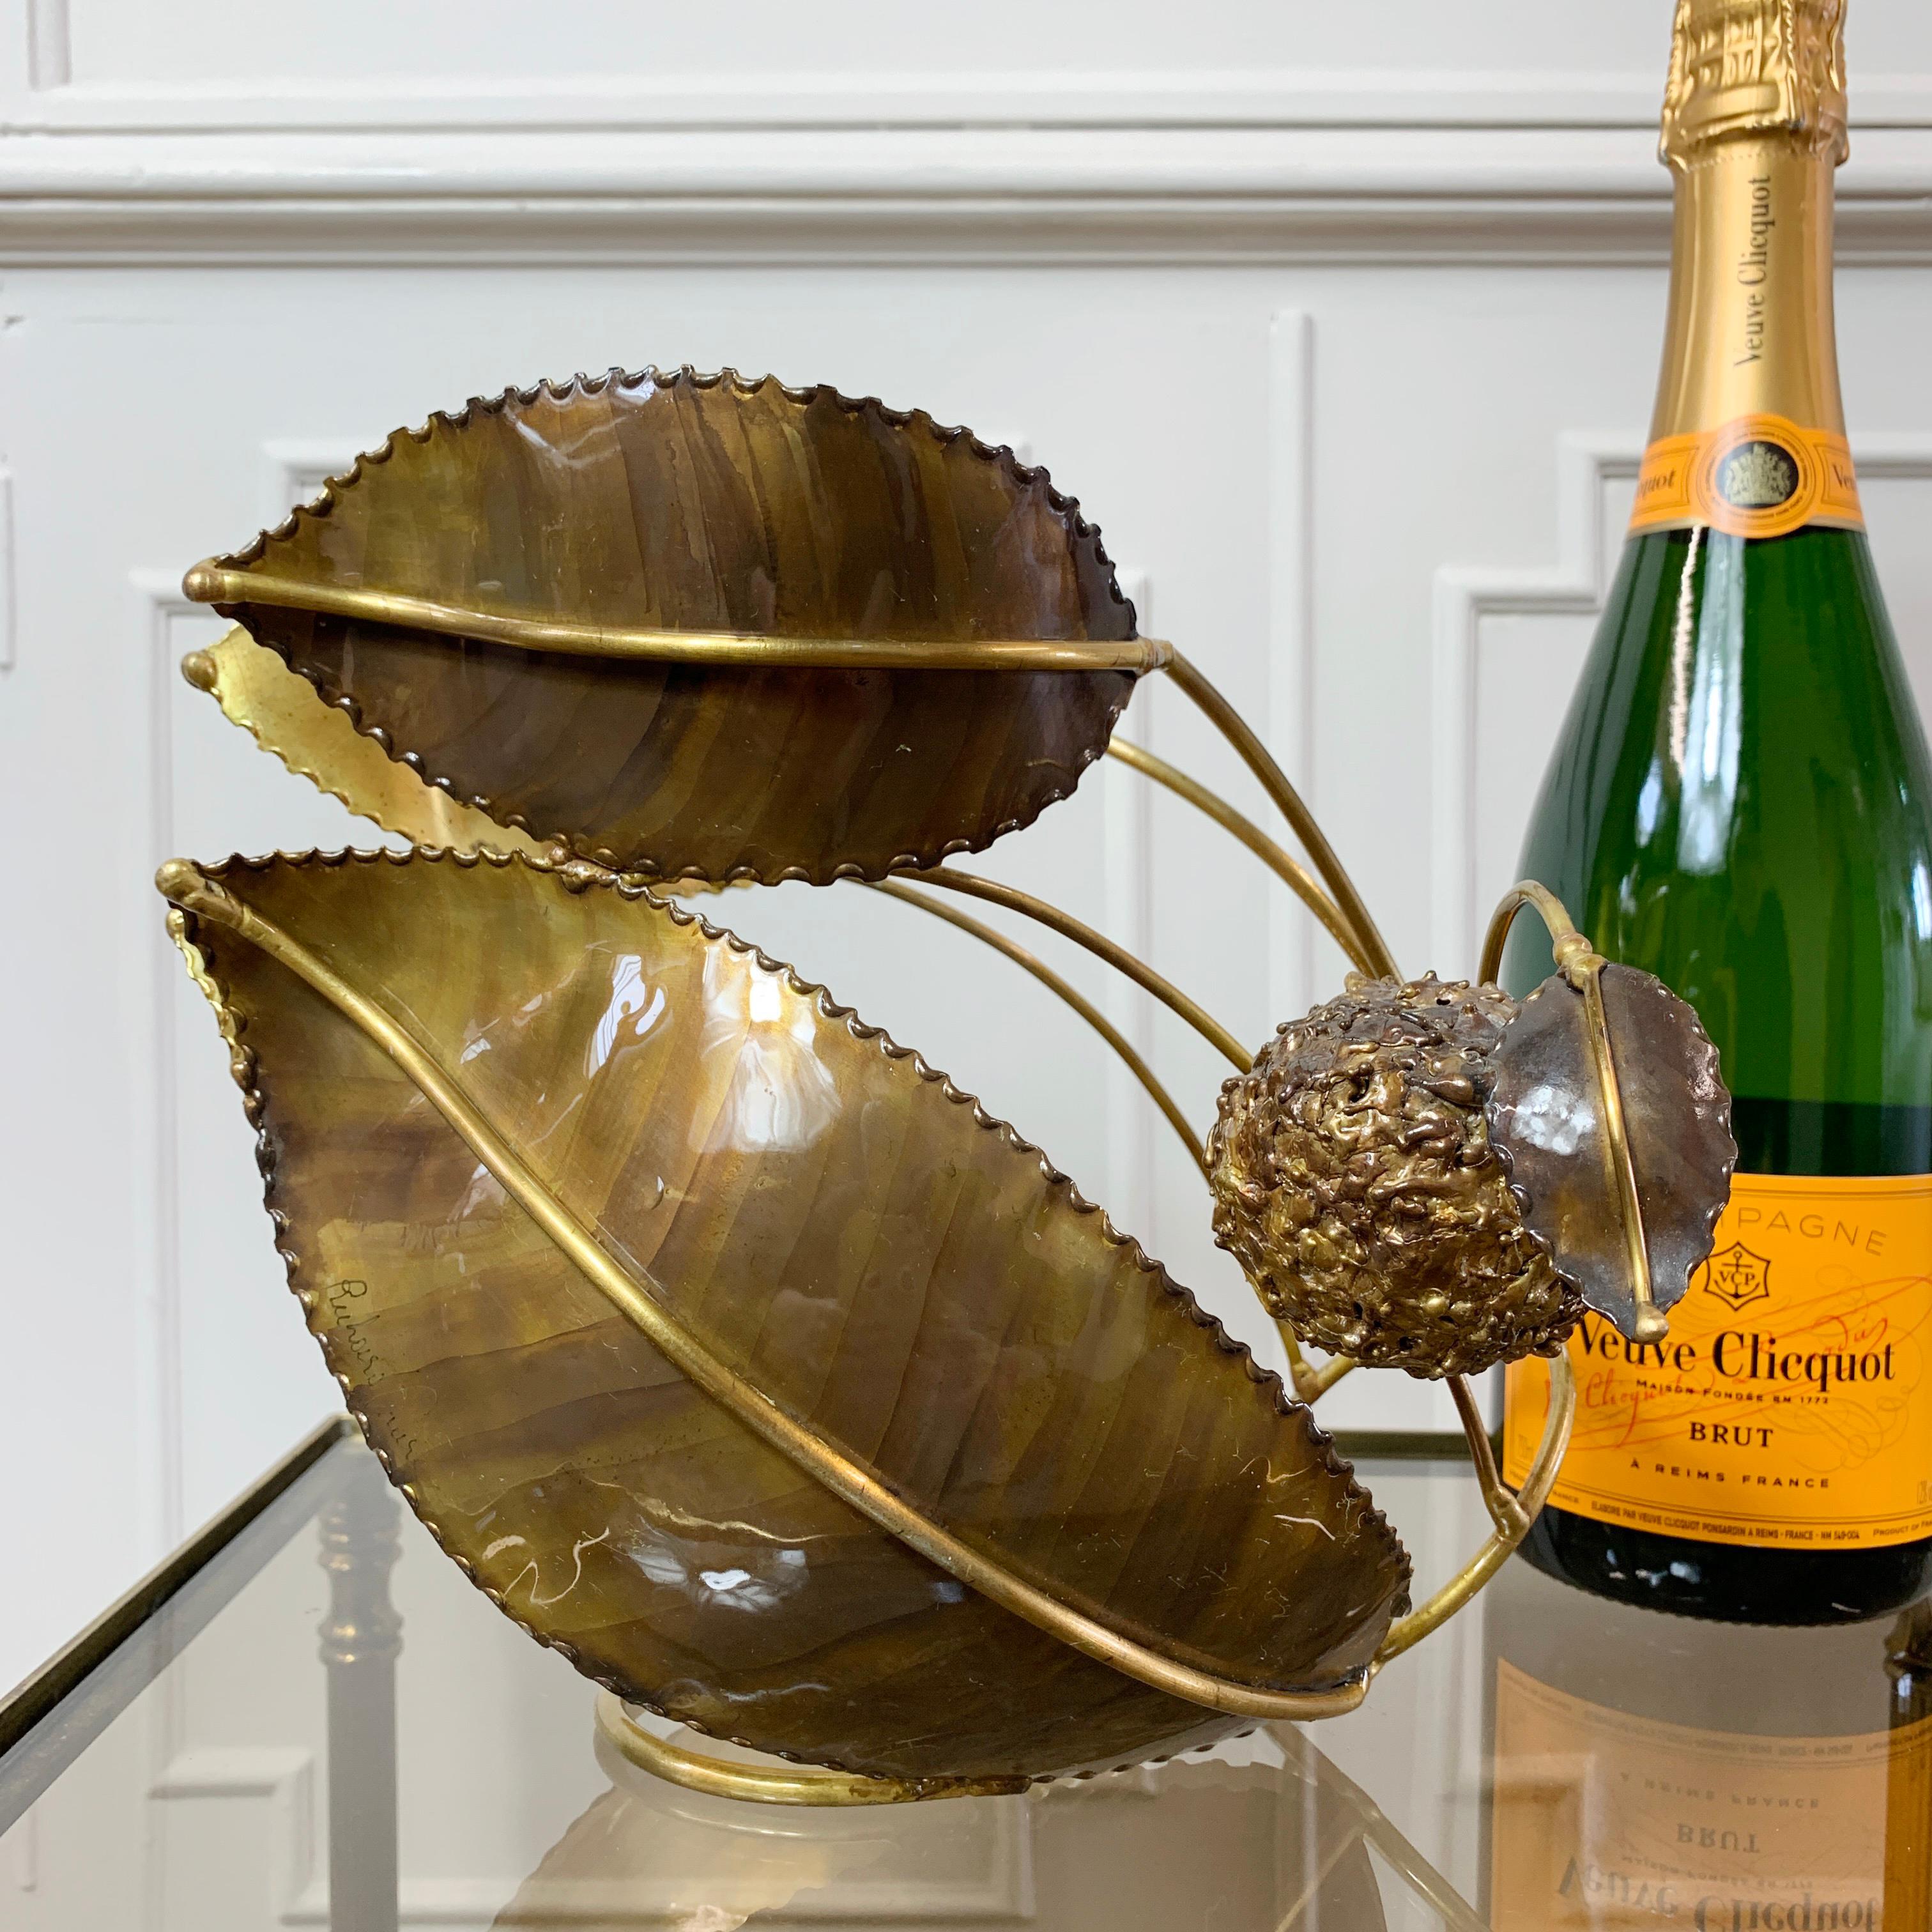 An exceptional signed sculptured wine bottle cradle by the renowned French Artist and Sculptor Richard Faure.

Hand crafted in brass, and intricately detailed in the form of a chestnut with foliage, this rare and unique piece of art, is fully